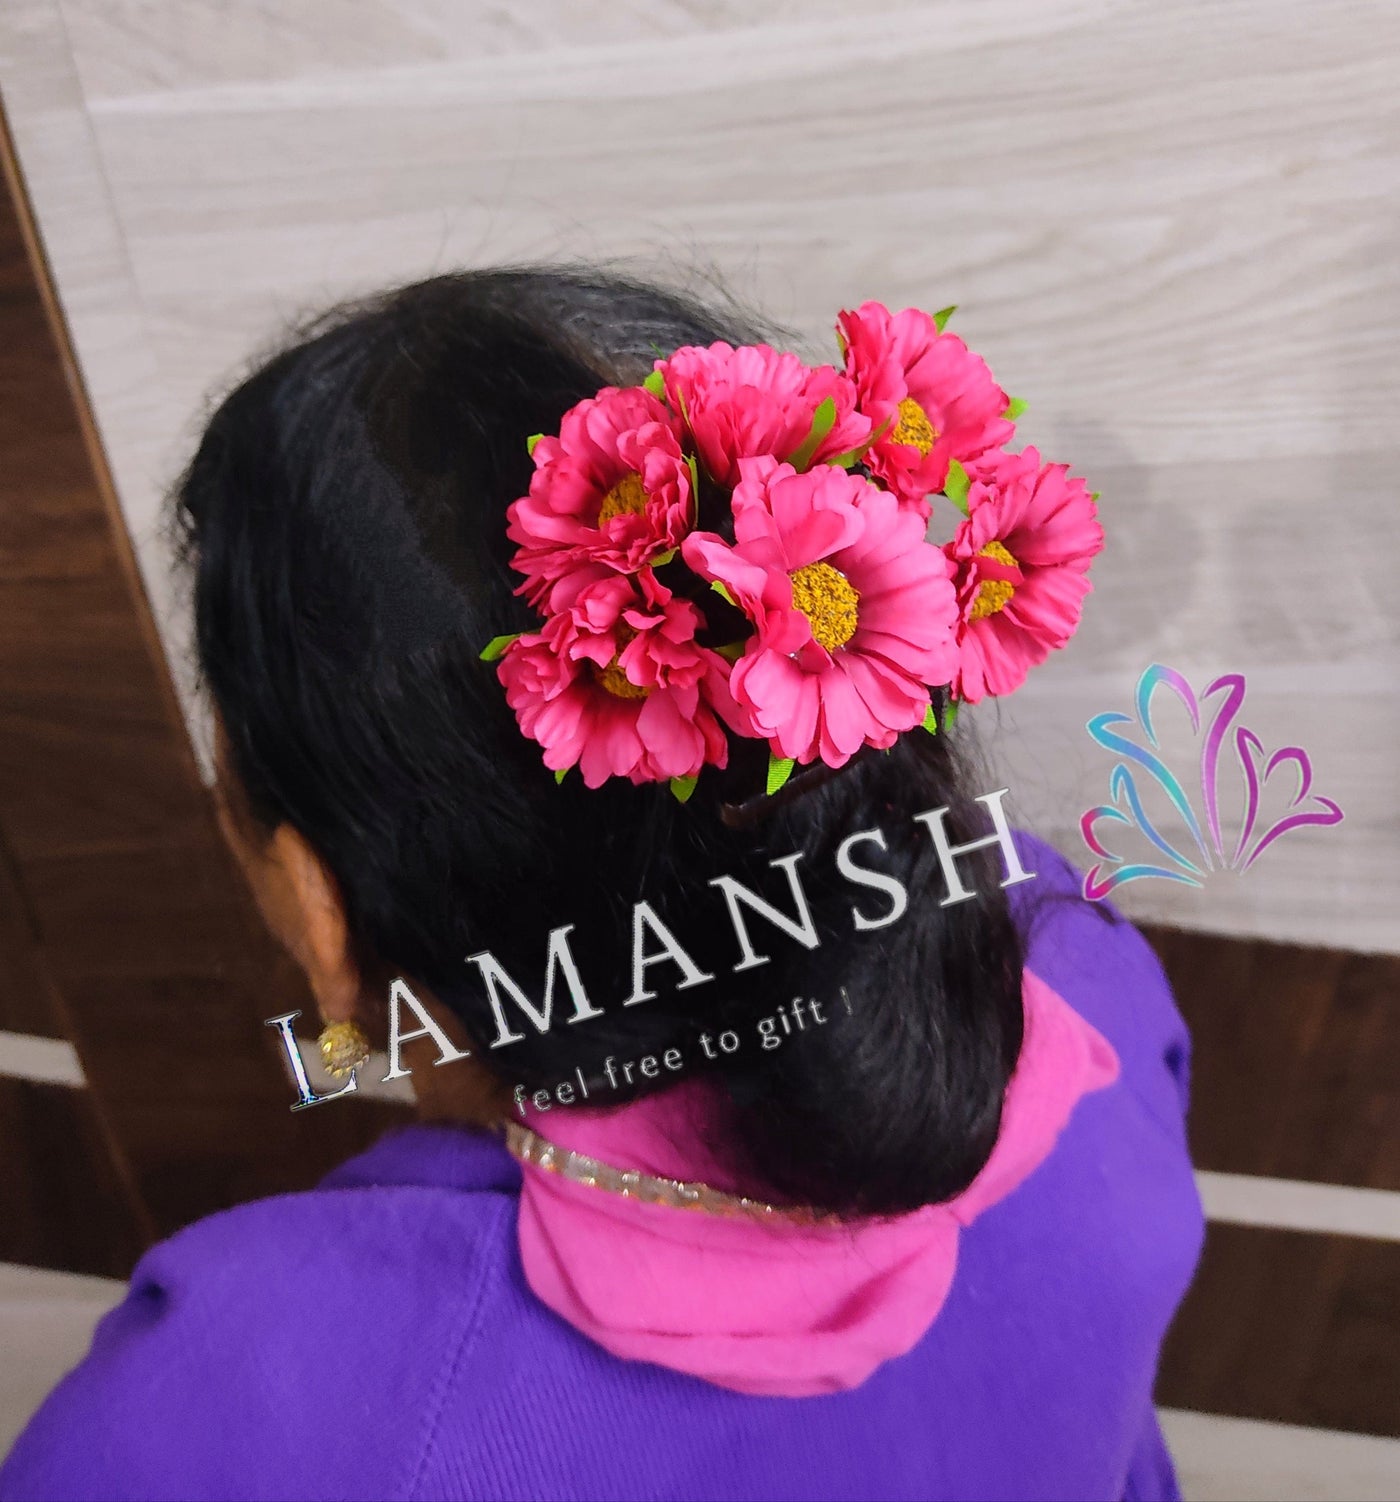 LAMANSH Flower Hair Accessory Multicolor / 12 bunch of Flowers ( 12 Flowers in each bunch ) / Bridal Style LAMANSH® Pack of 12×12 Pink Sunflower 🌺 Floral Accessories for Hair Bun Juda / For Wedding 💥 & Women's Bridal Makeup